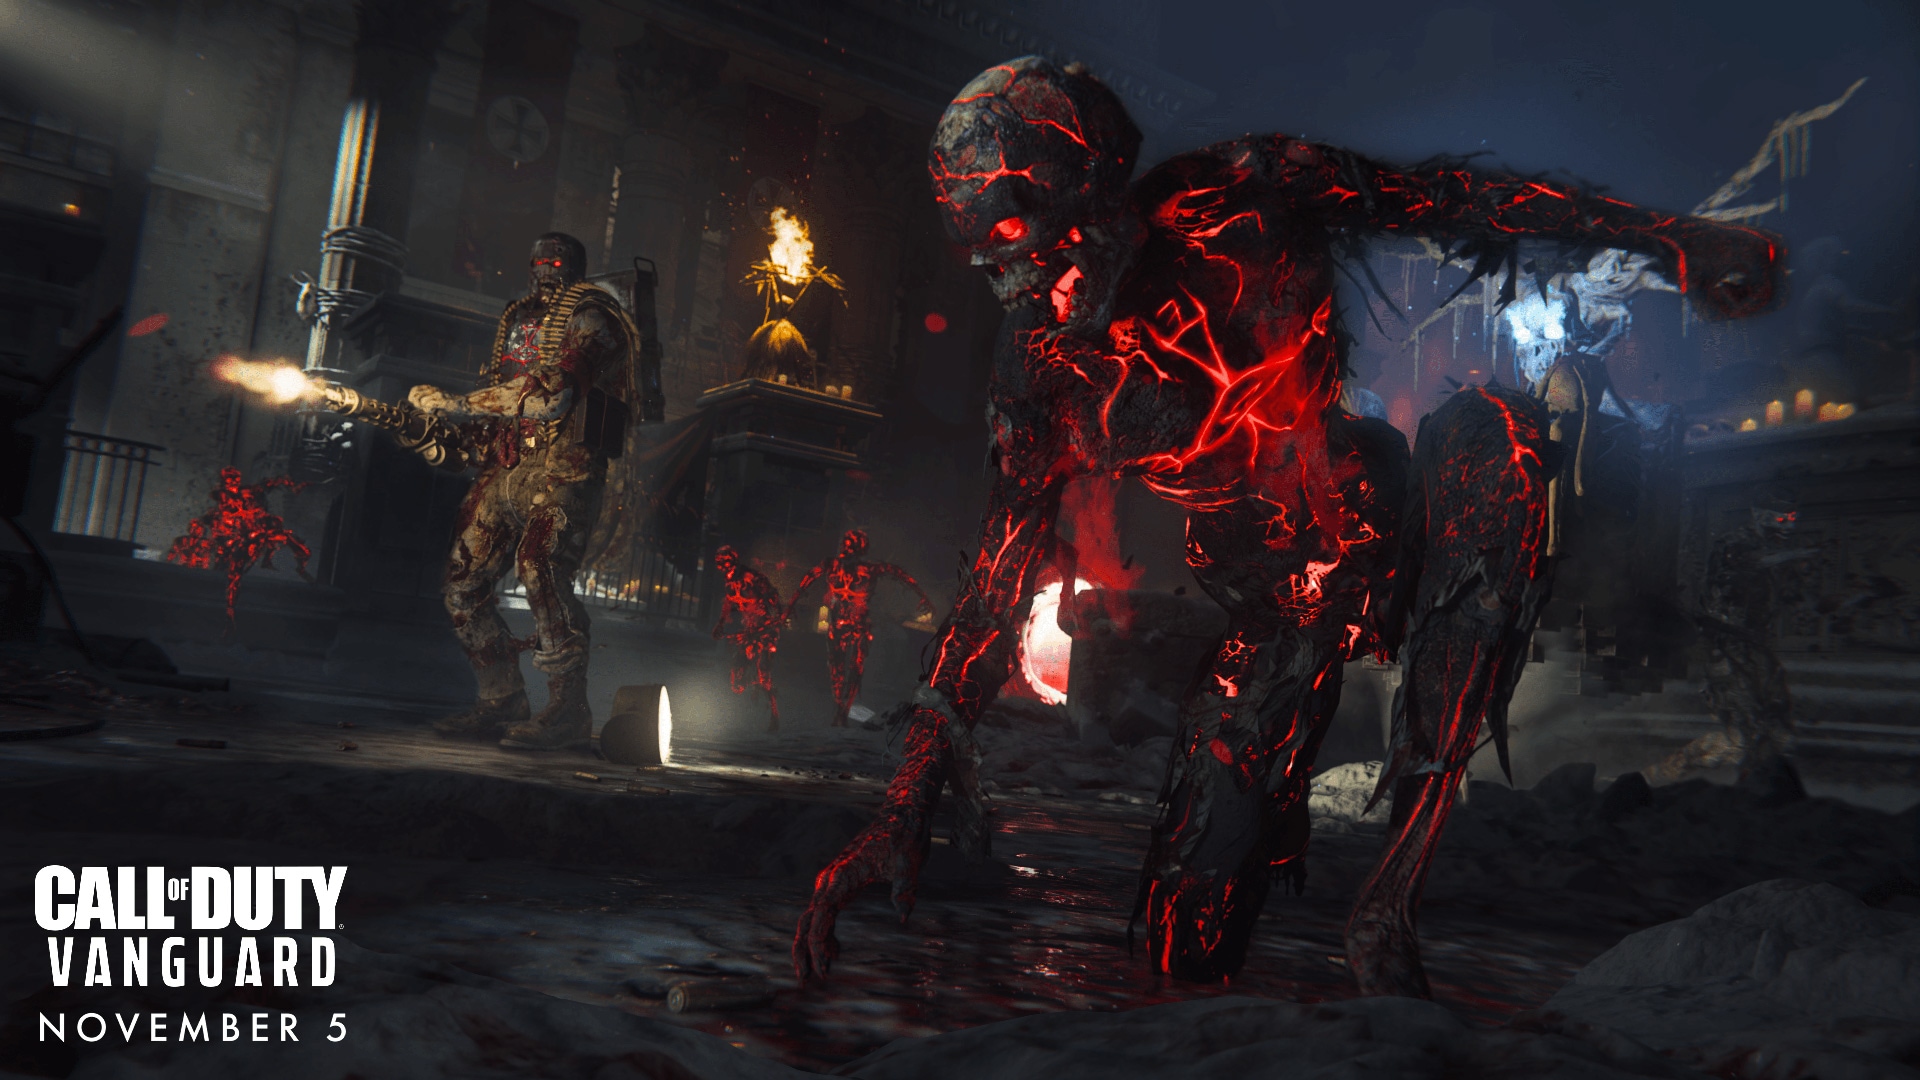 Zombies with guns and glowing red with arcane energies? I'm sure this will be juuuust fine.